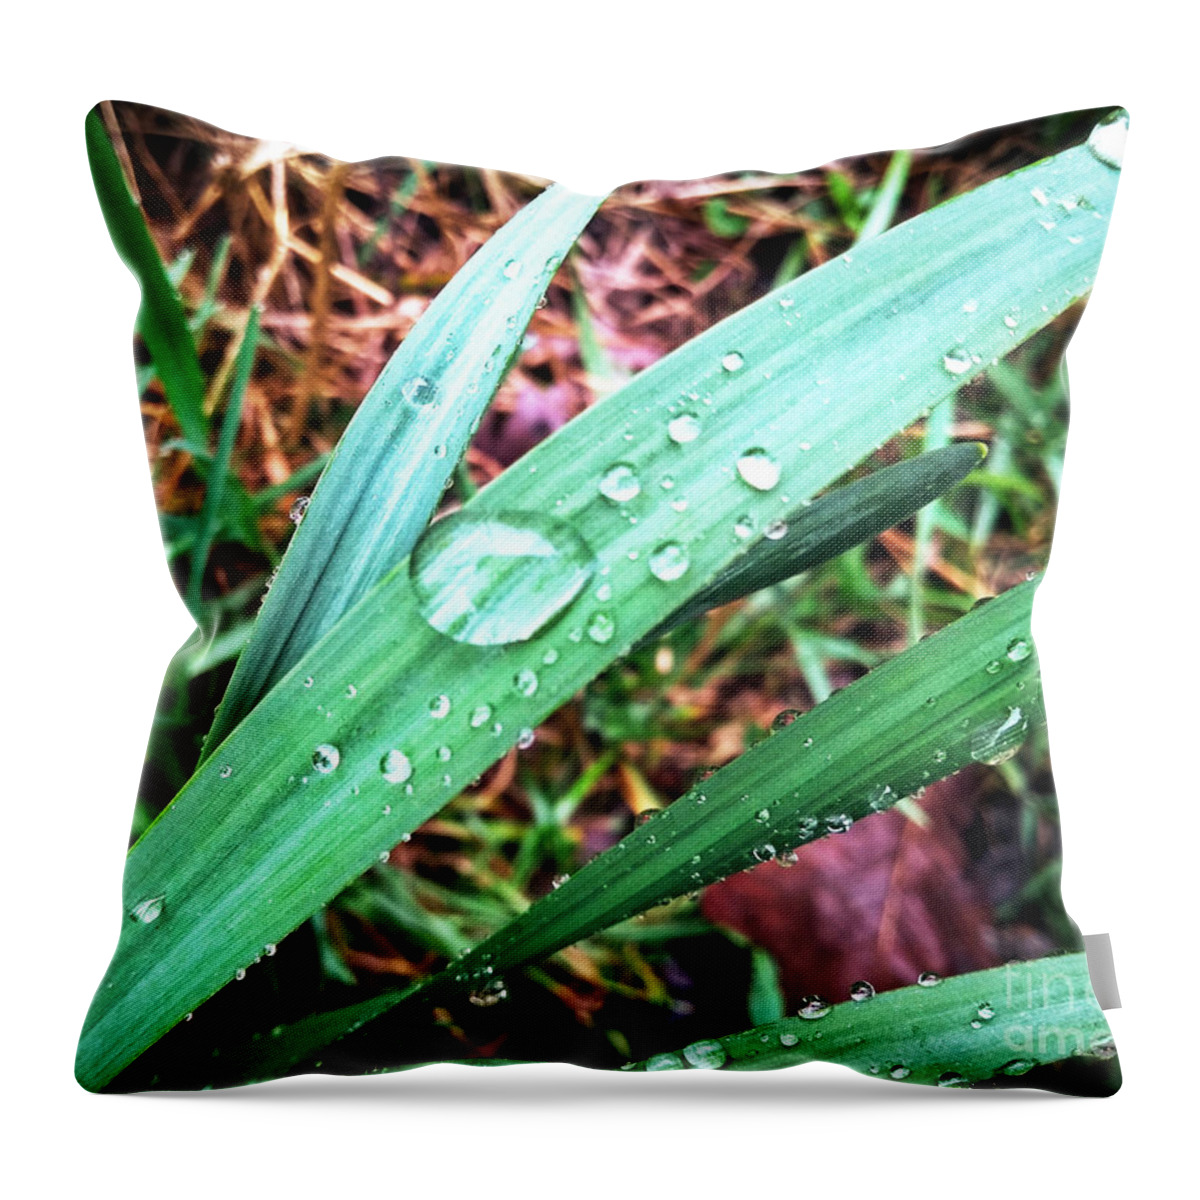 Water Throw Pillow featuring the photograph Droplets by Robert Knight